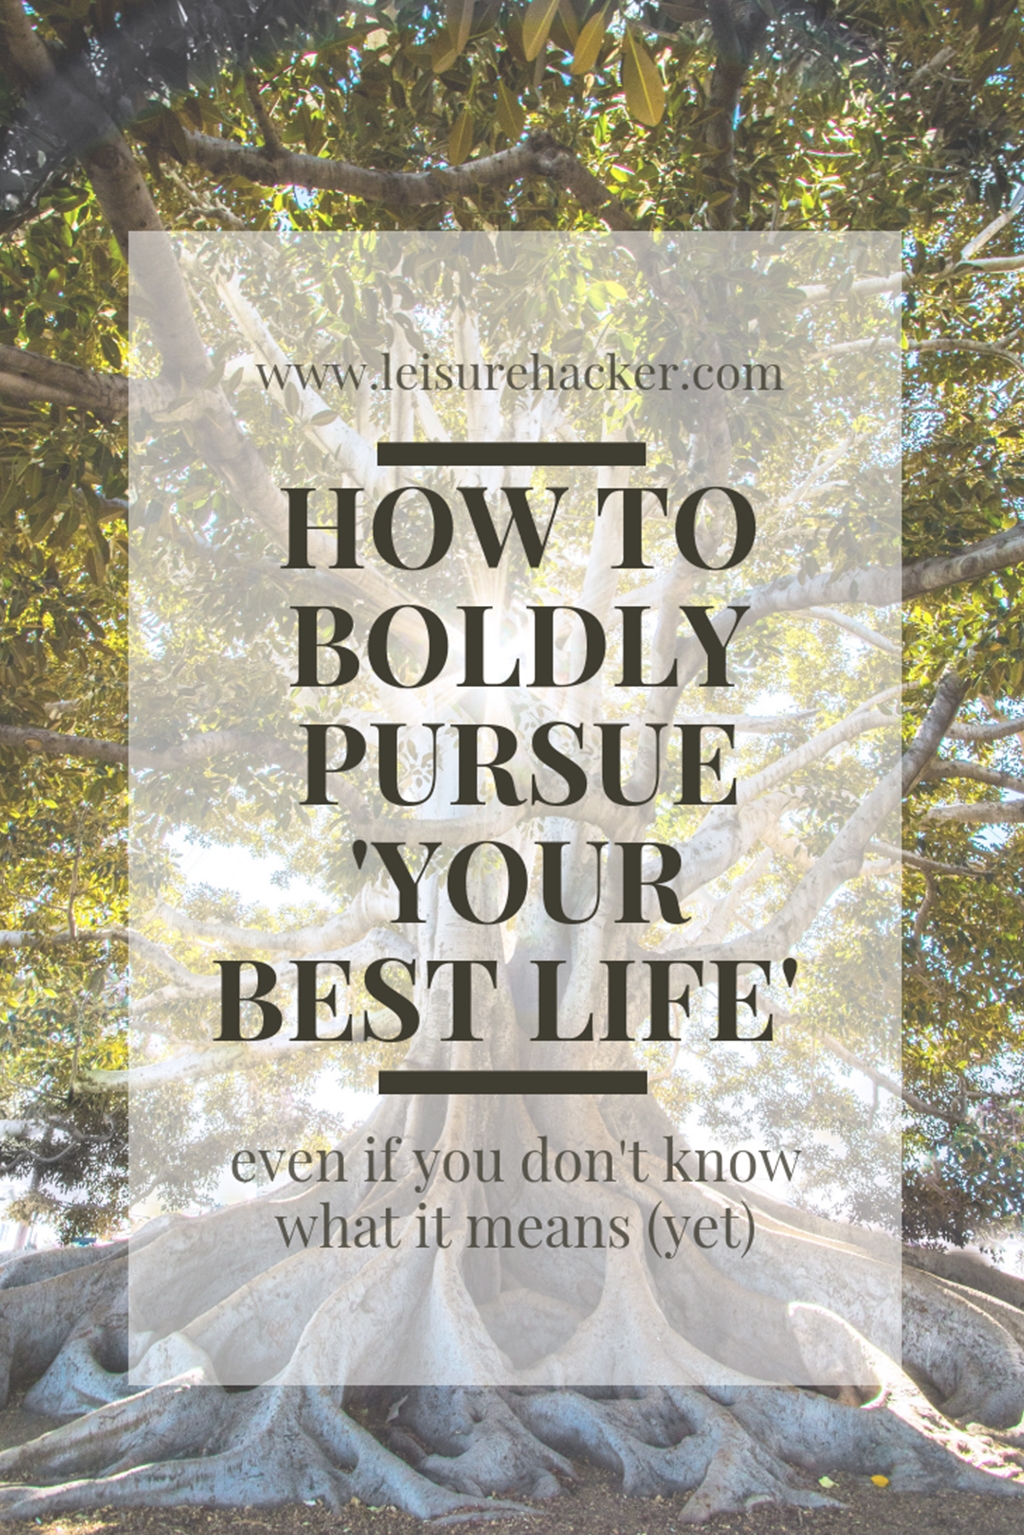 How to boldly pursue 'your best life' even if you don't know what it means (yet)